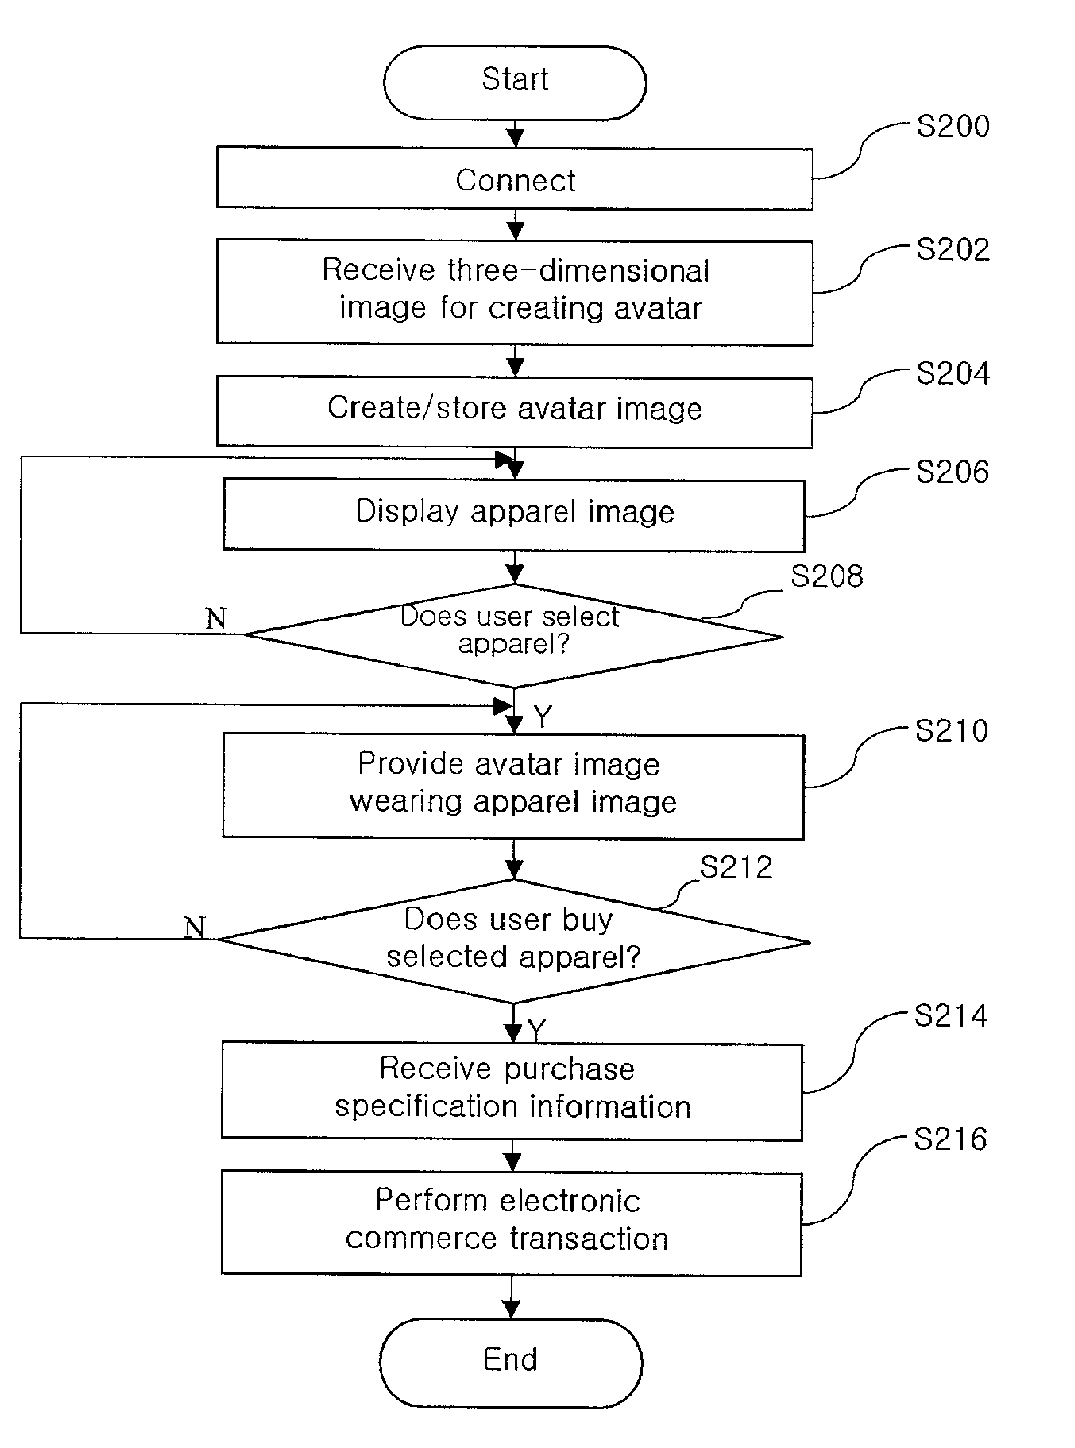 Electronic Commerce System for the Digital Fashion Using an Avatar Based on a User and Method for Operating the Same